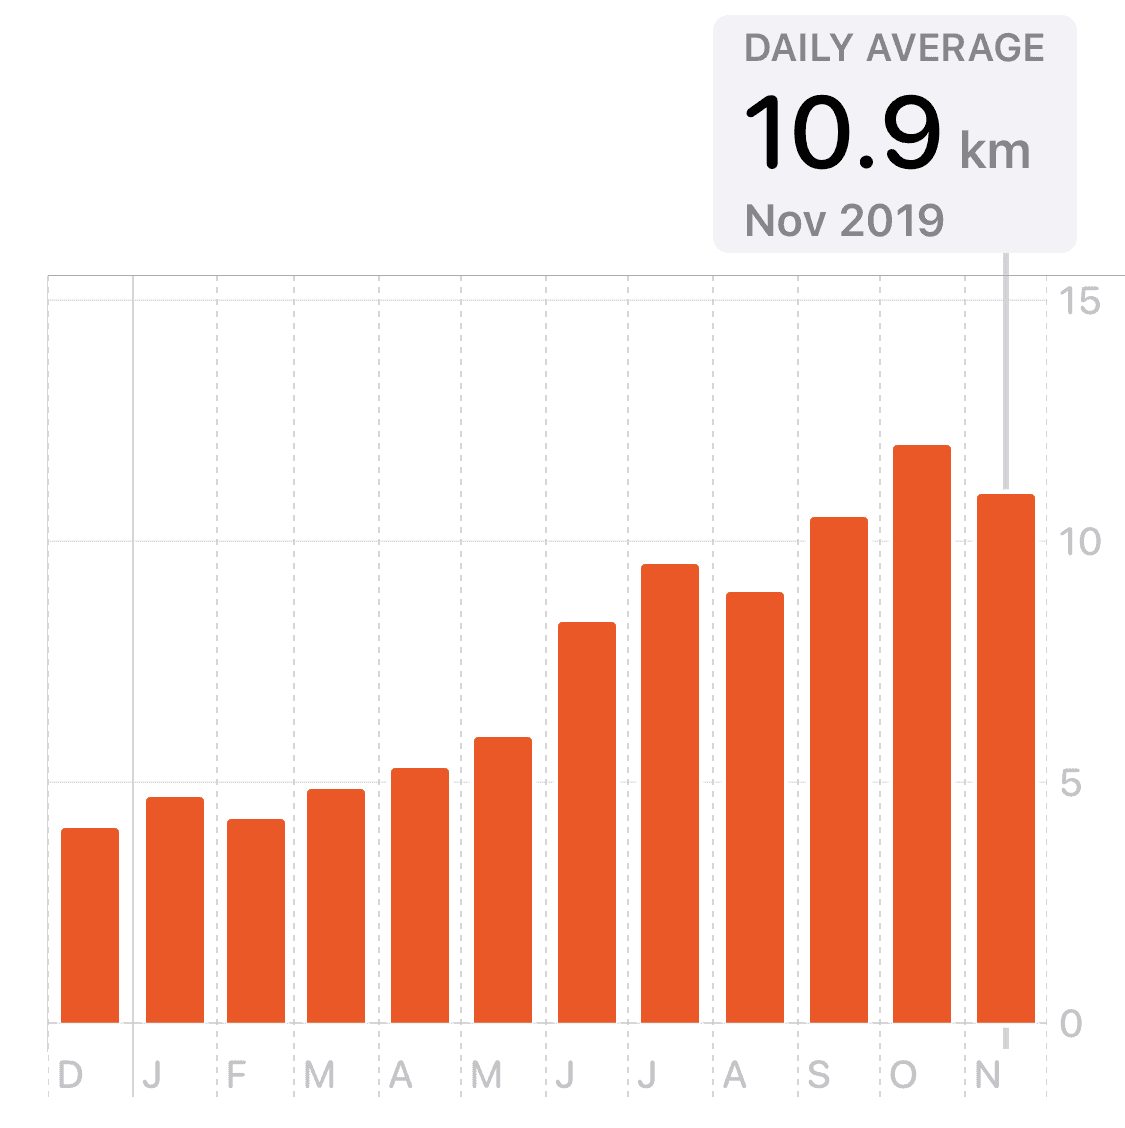 Graph of my daily walking and running average distance over the past year, which is way up